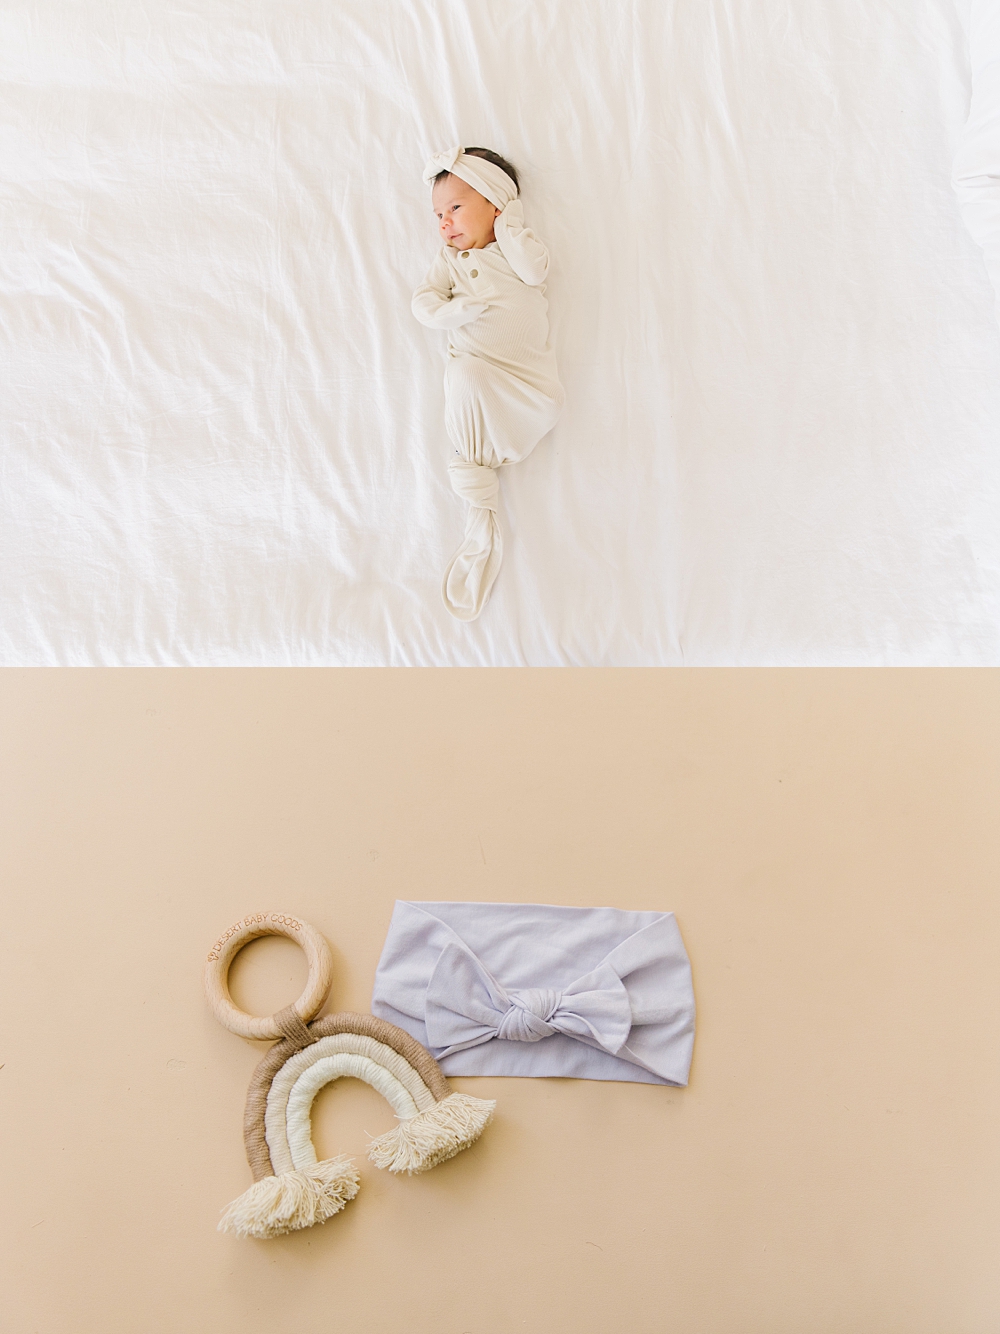 Baby Product Shoot | Quinn St